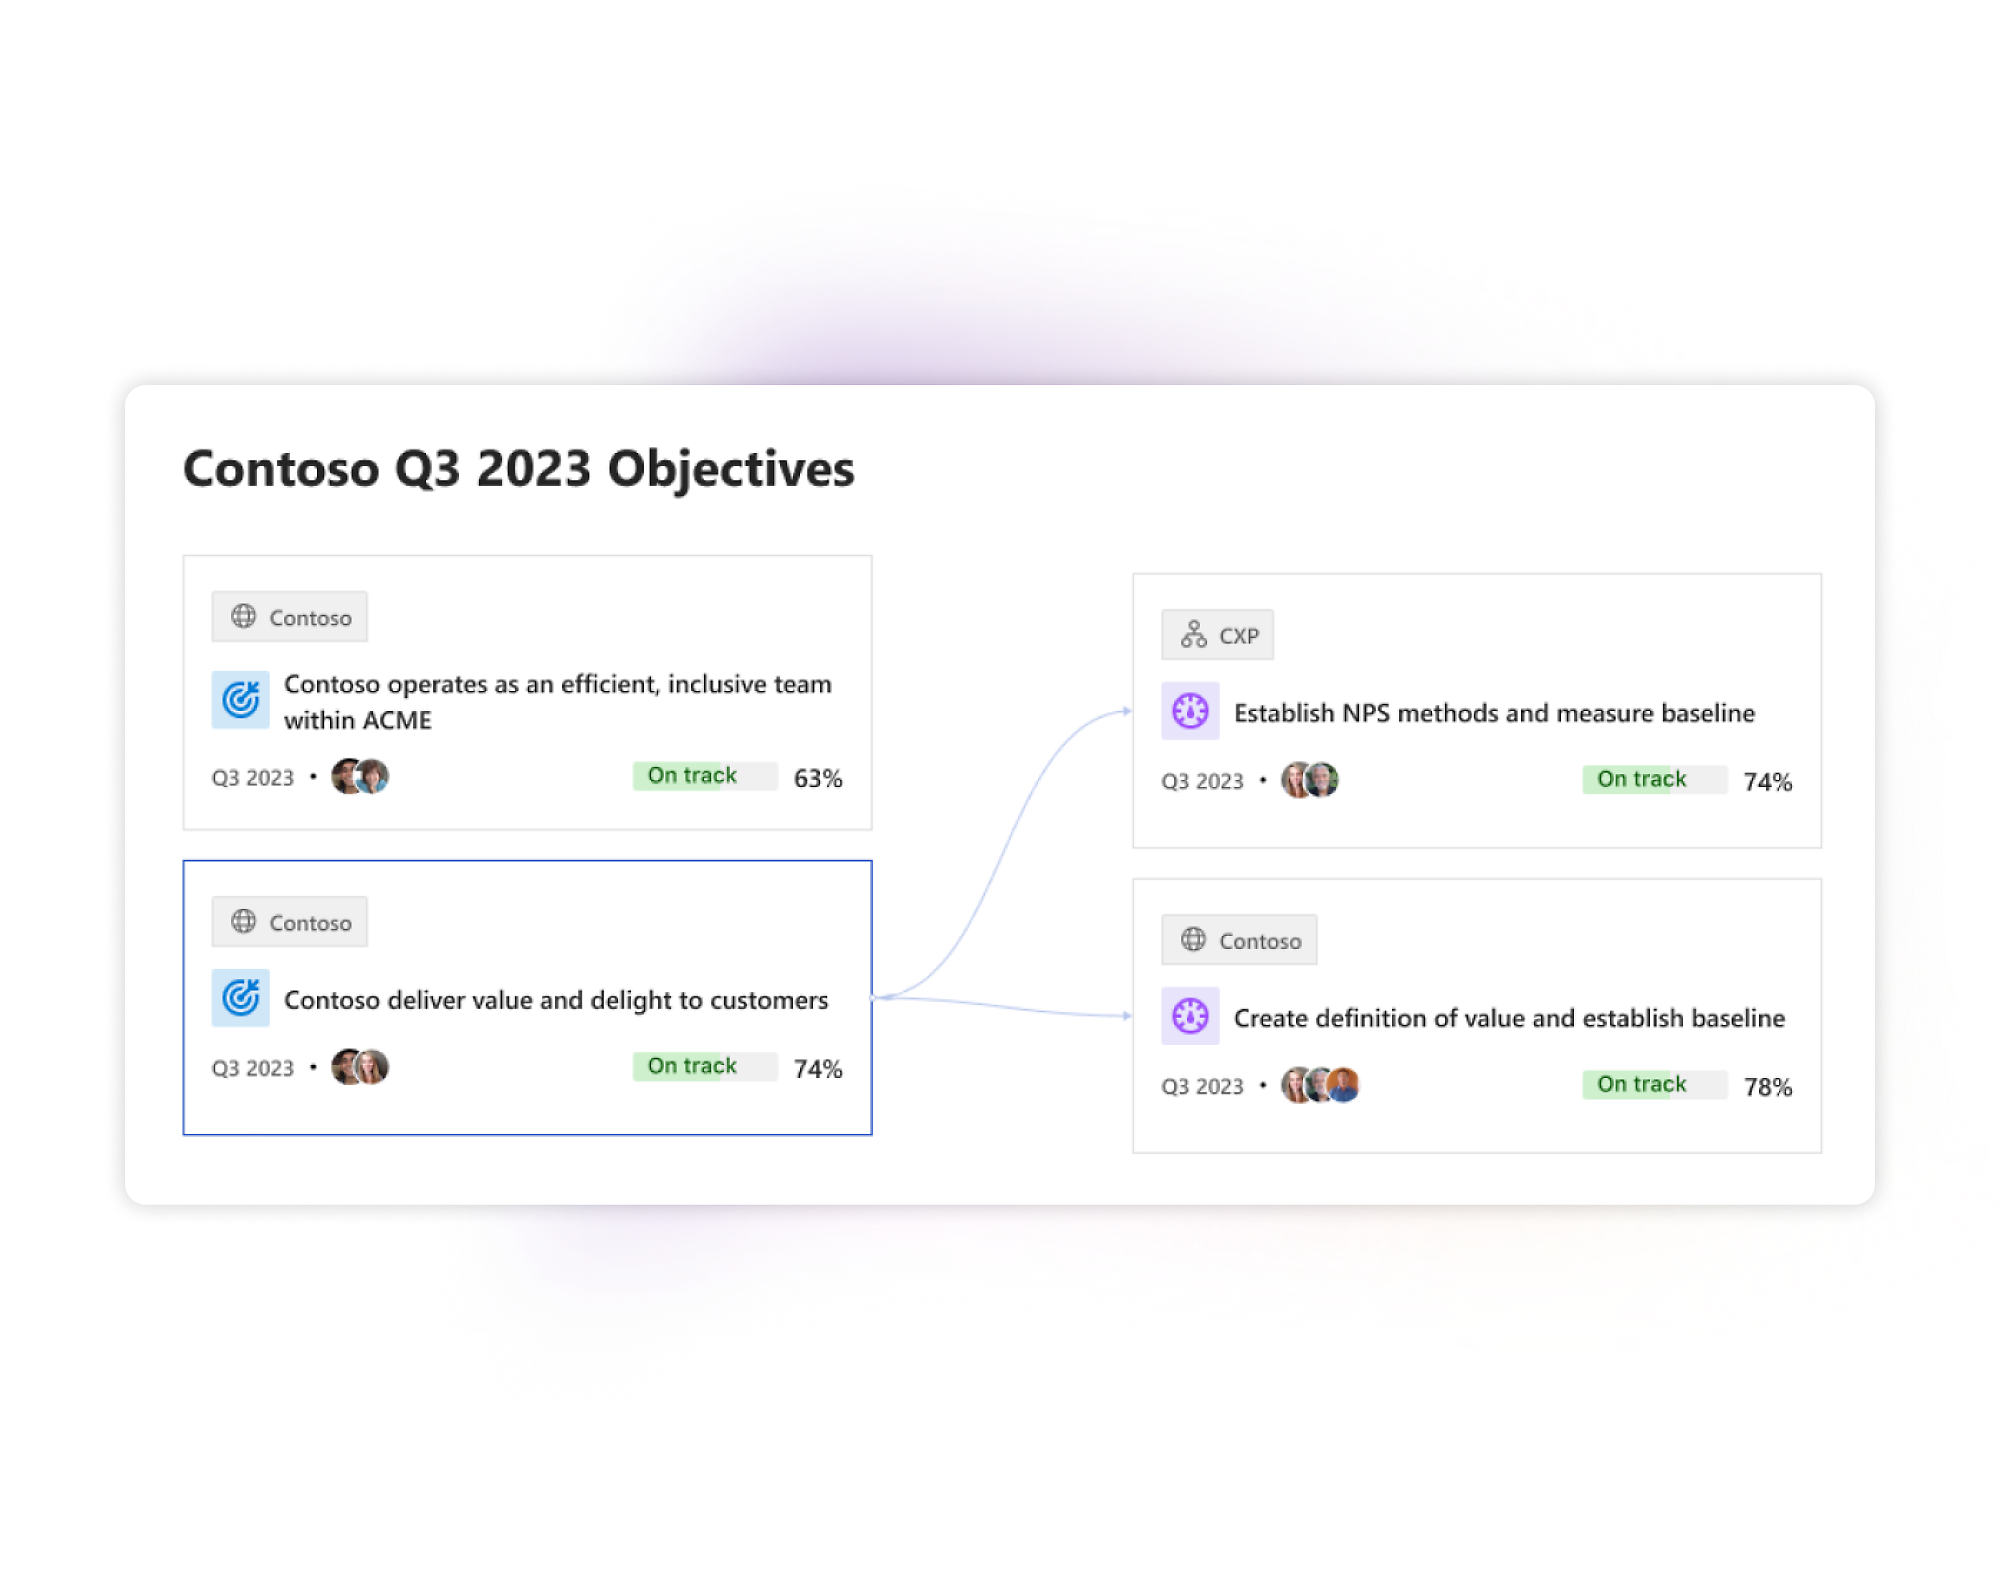 Screenshot showing contoso's q3 2023 objectives dashboard with progress tracking and status indicators 